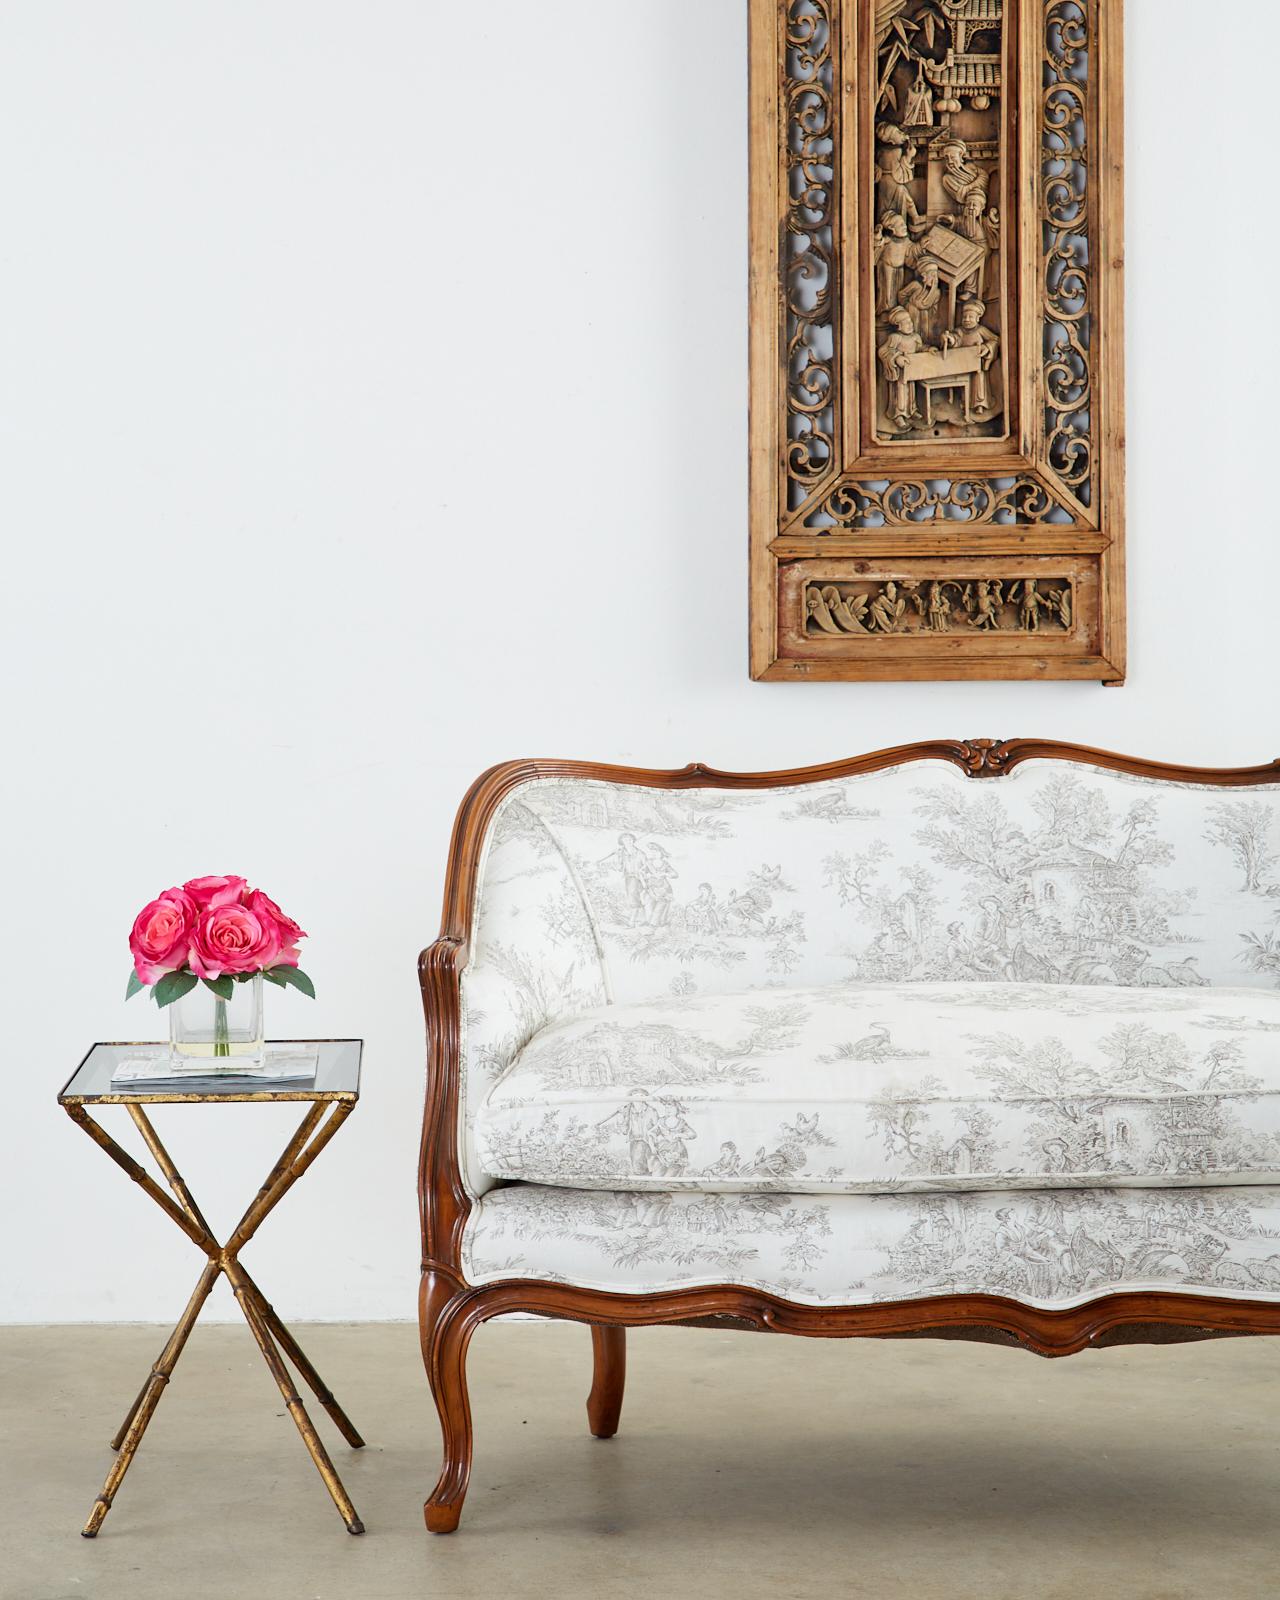 Exquisite French canapé or settee made in the Provincial or Louis XV style. Features a carved walnut frame with a serpentine crest rail and apron. The molded arms gracefully curve down to the seat which is topped with a loose seat cushion.